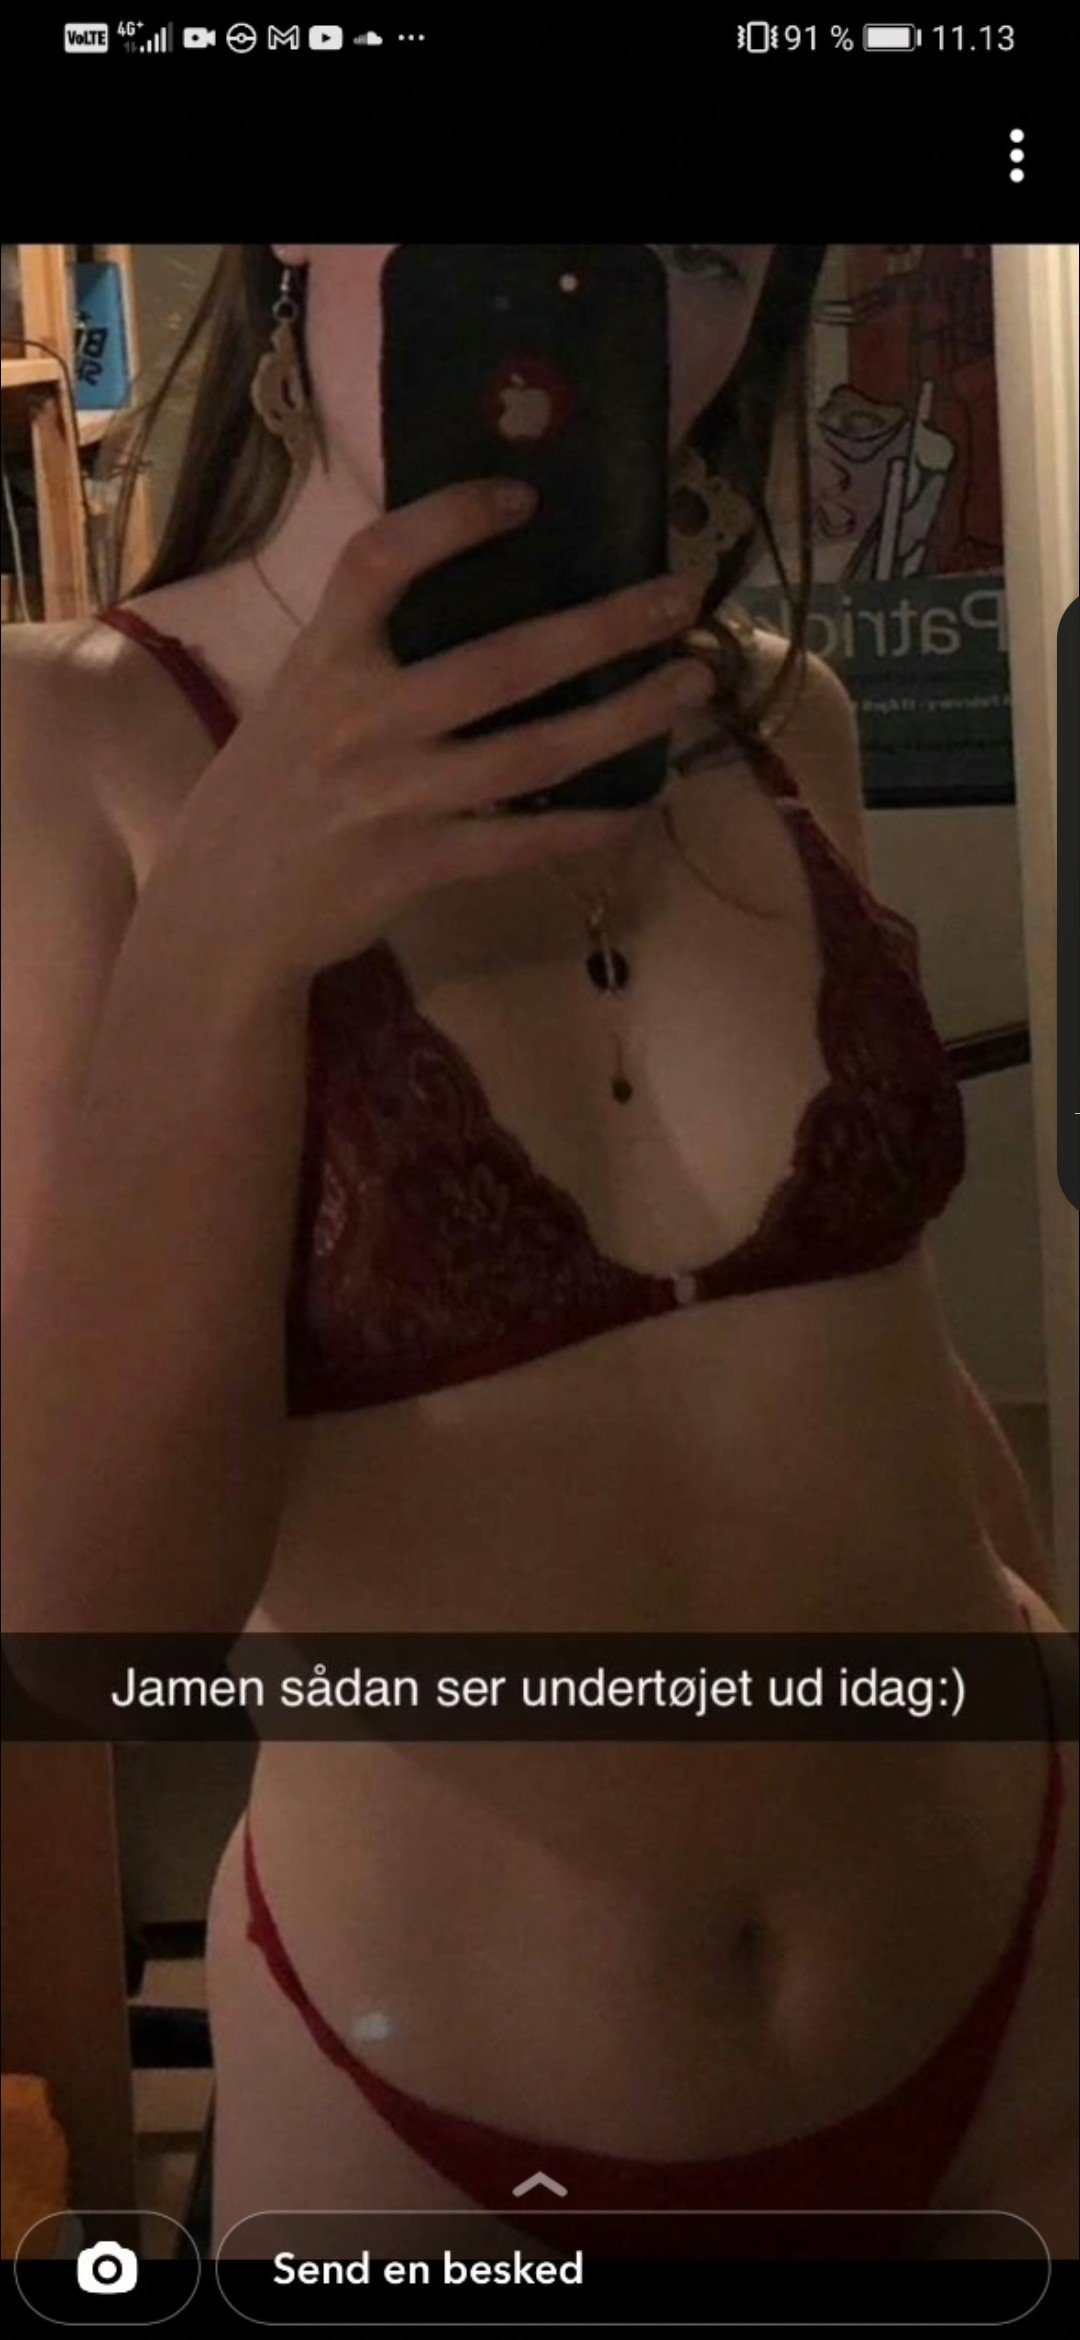 Photo by hvf91 with the username @hvf91,  February 21, 2022 at 1:01 PM. The post is about the topic Danish and the text says '#Danish #zenia #luder #snapchat #19y #ballerup #dansk'